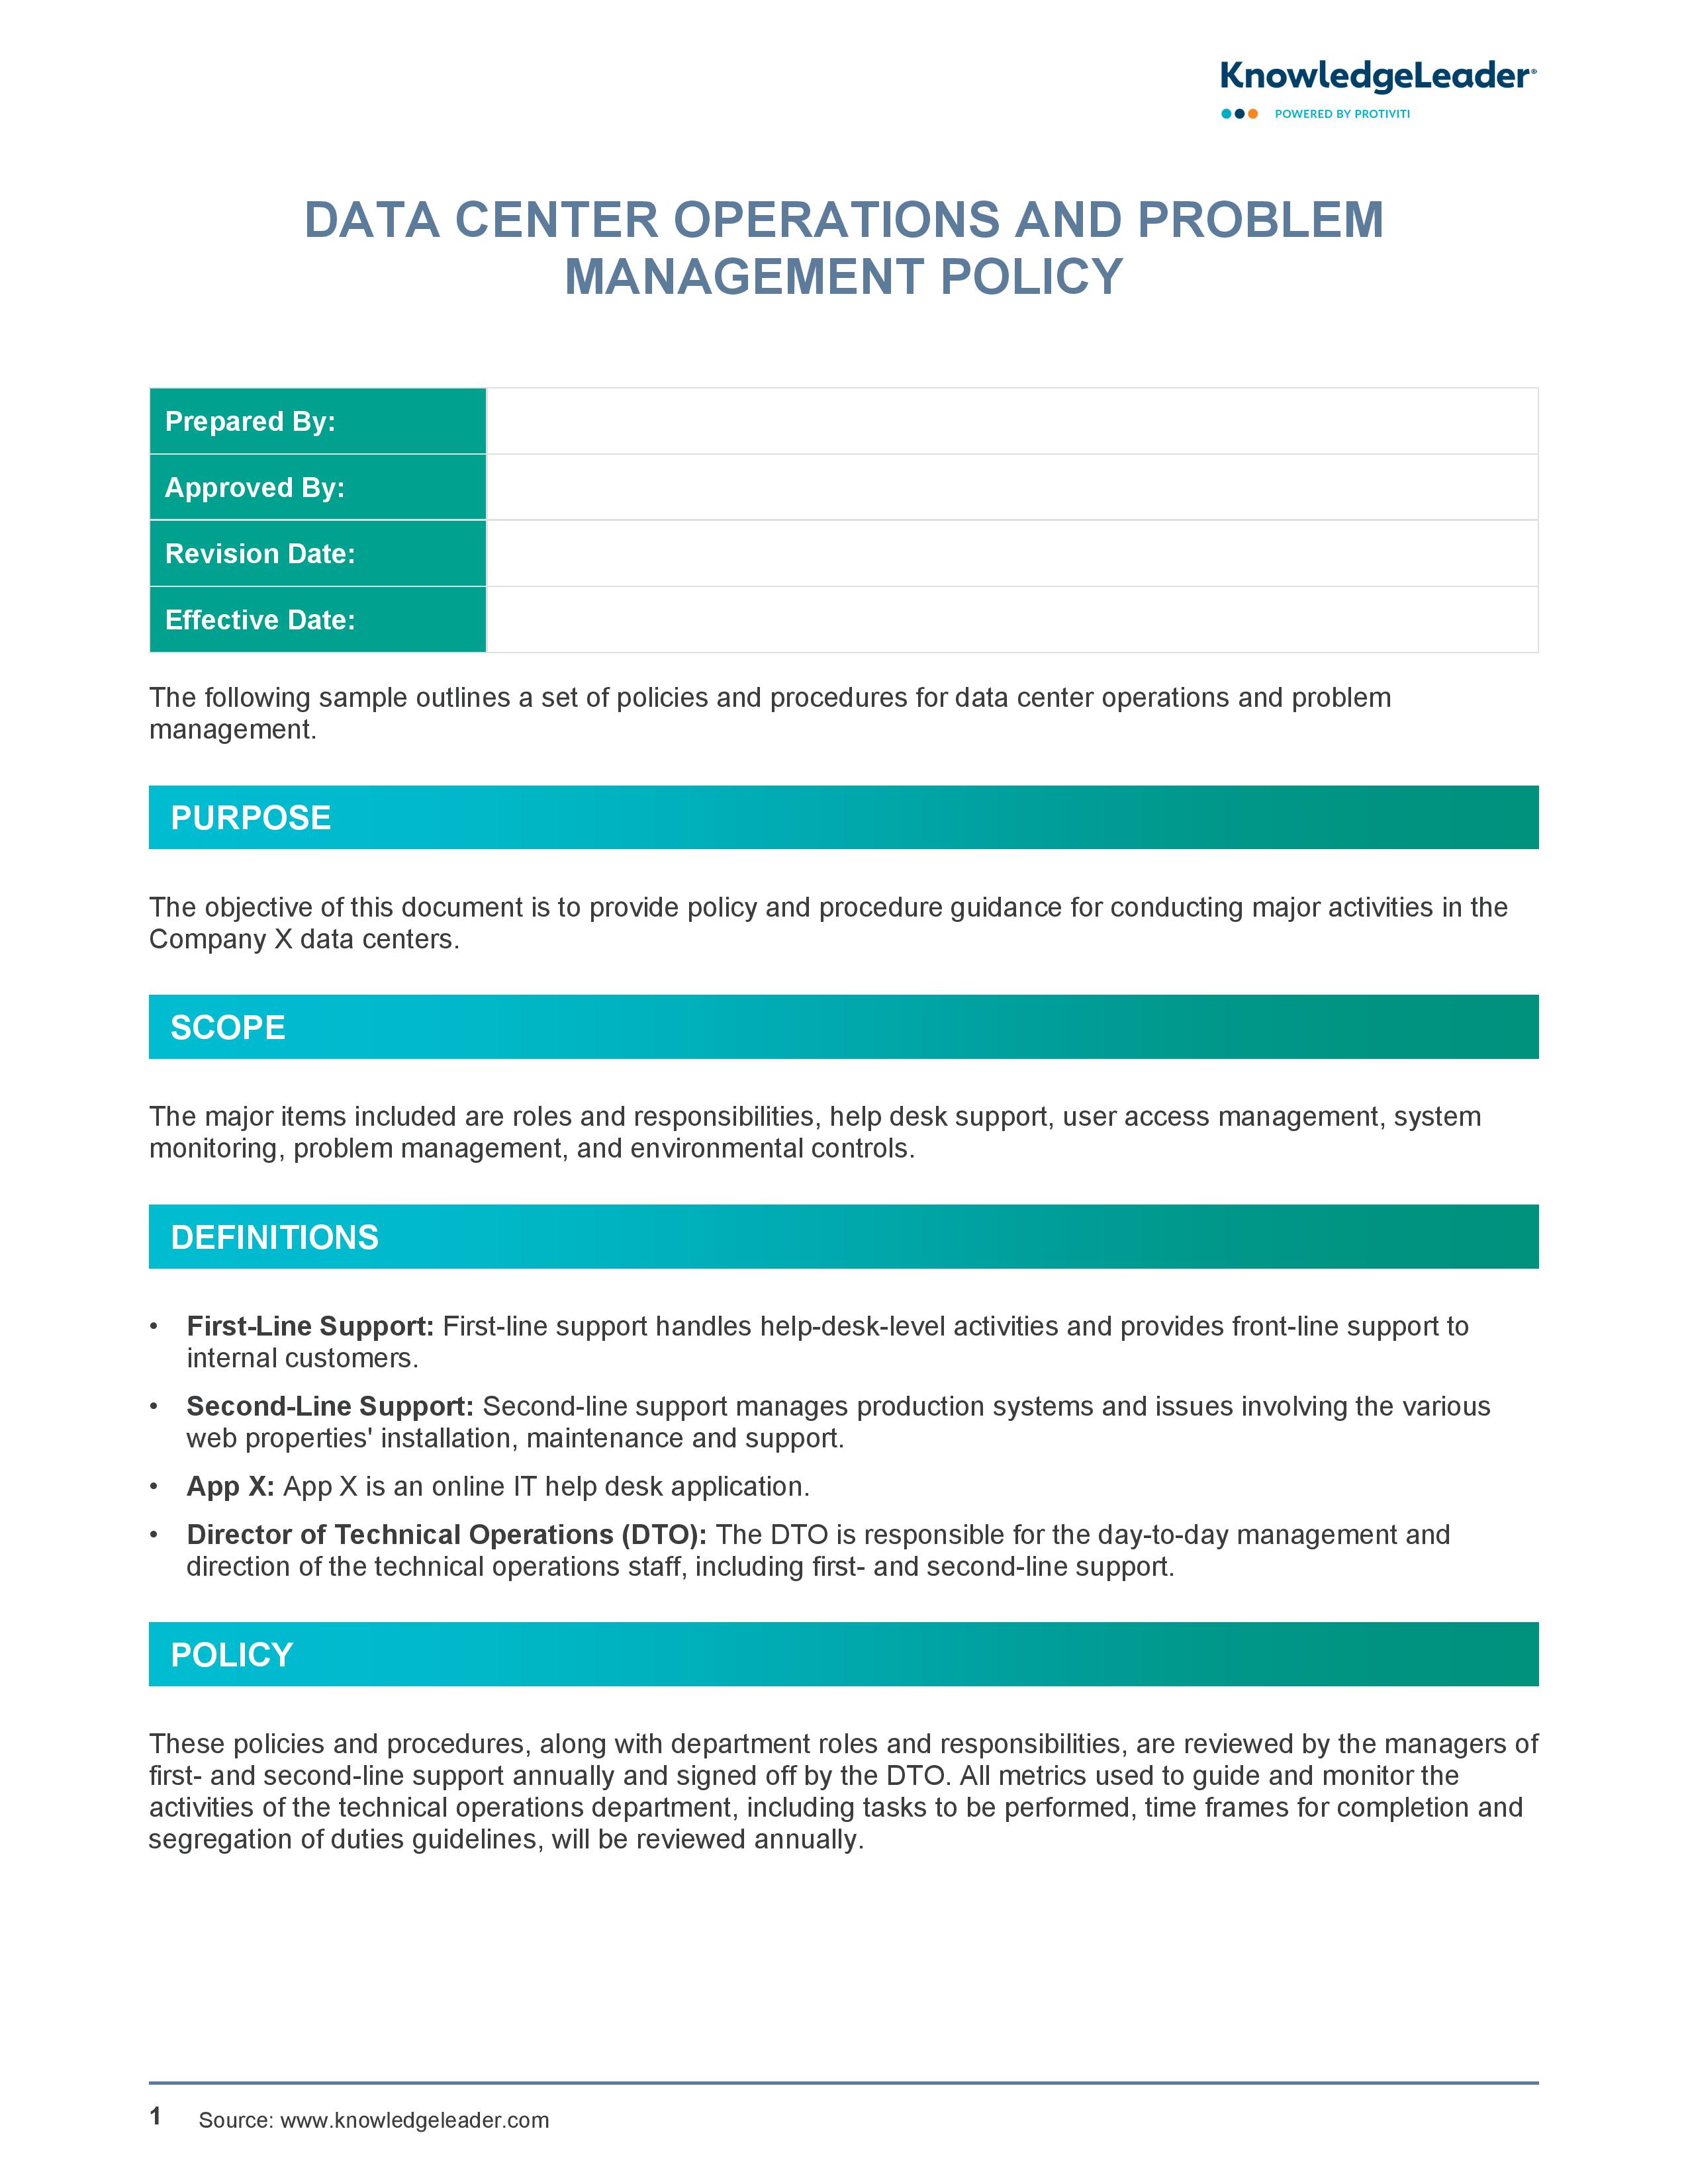 Screenshot of the first page of Data Center Operations and Problem Management Policy